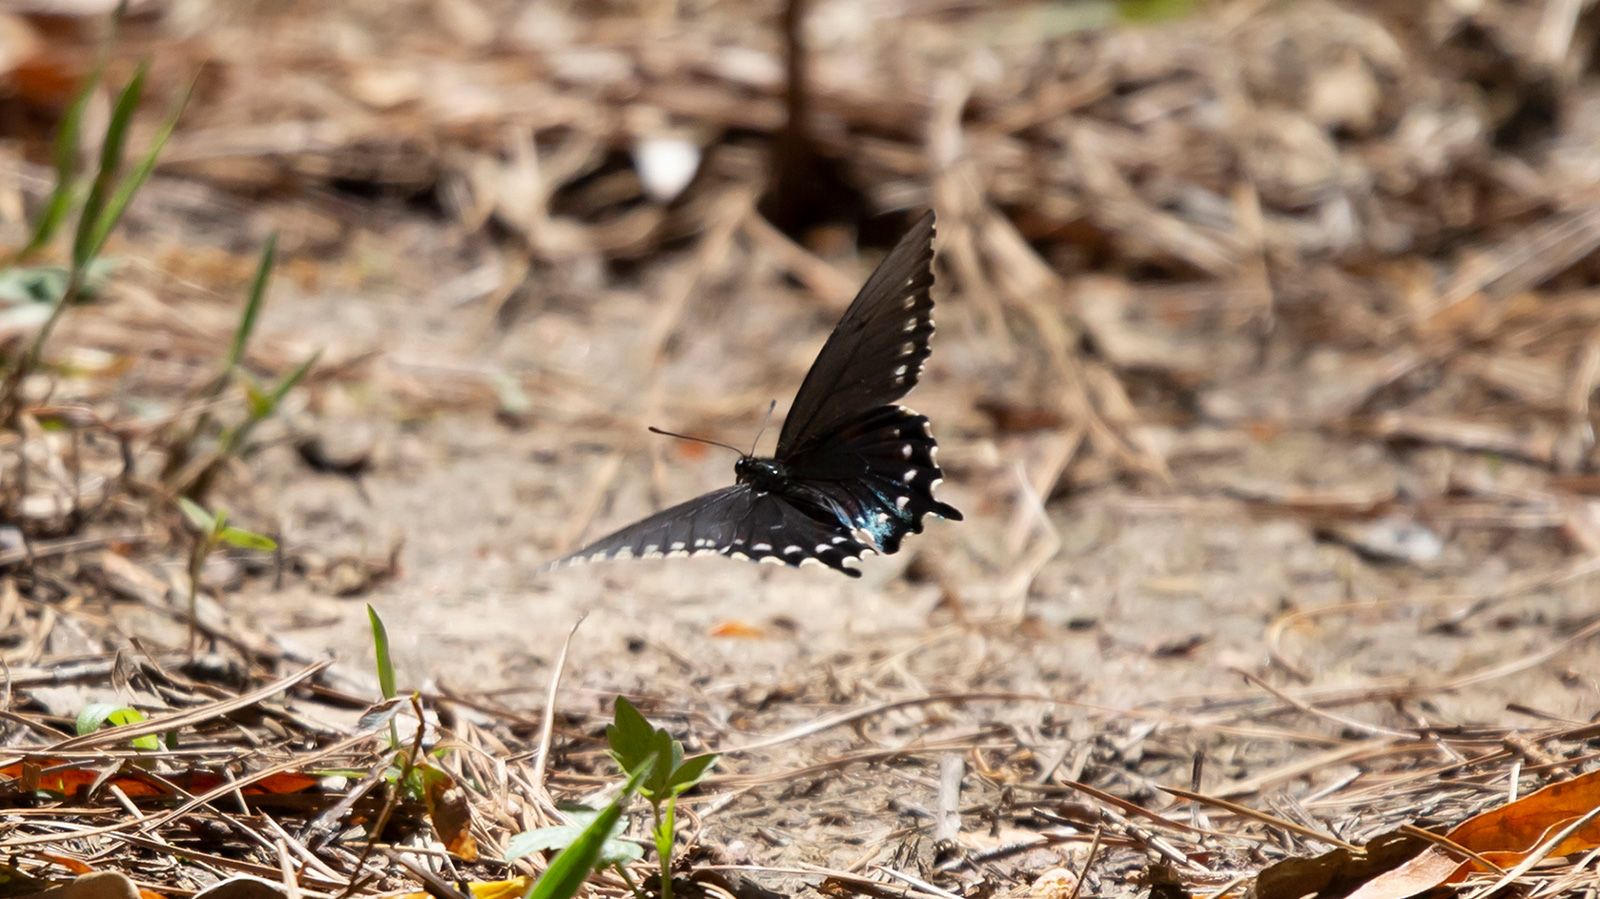 Pipevine swallowtail butterfly flying close to the ground